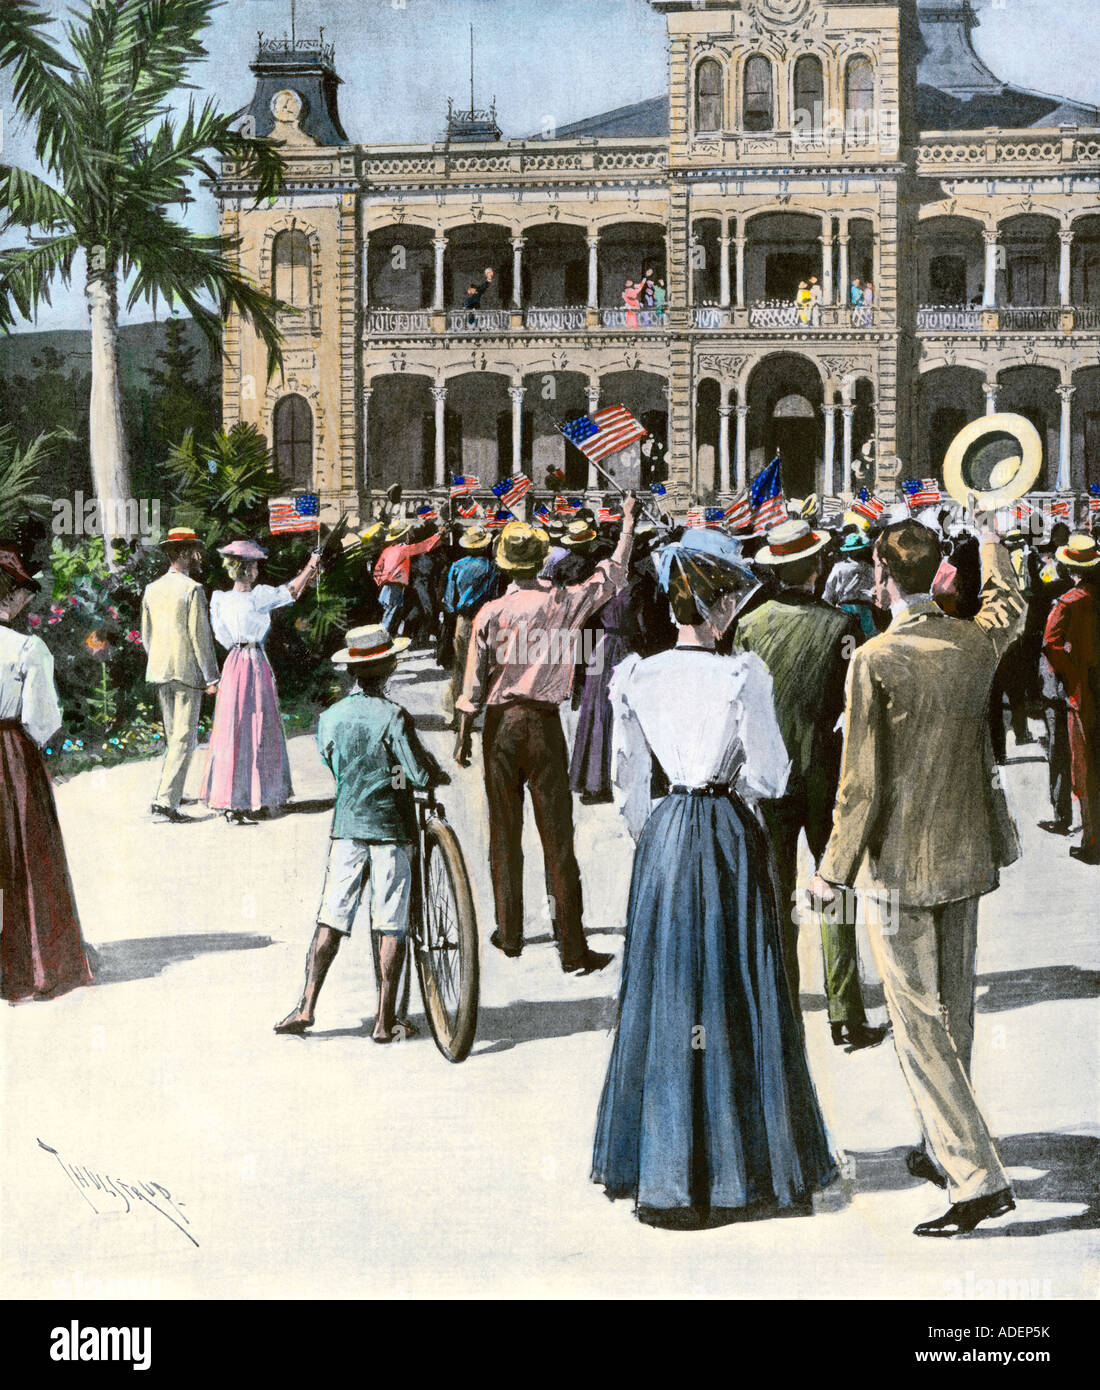 Hawaiians receive news of annexation by the United States Honolulu 1898. Hand-colored halftone of an illustration Stock Photo